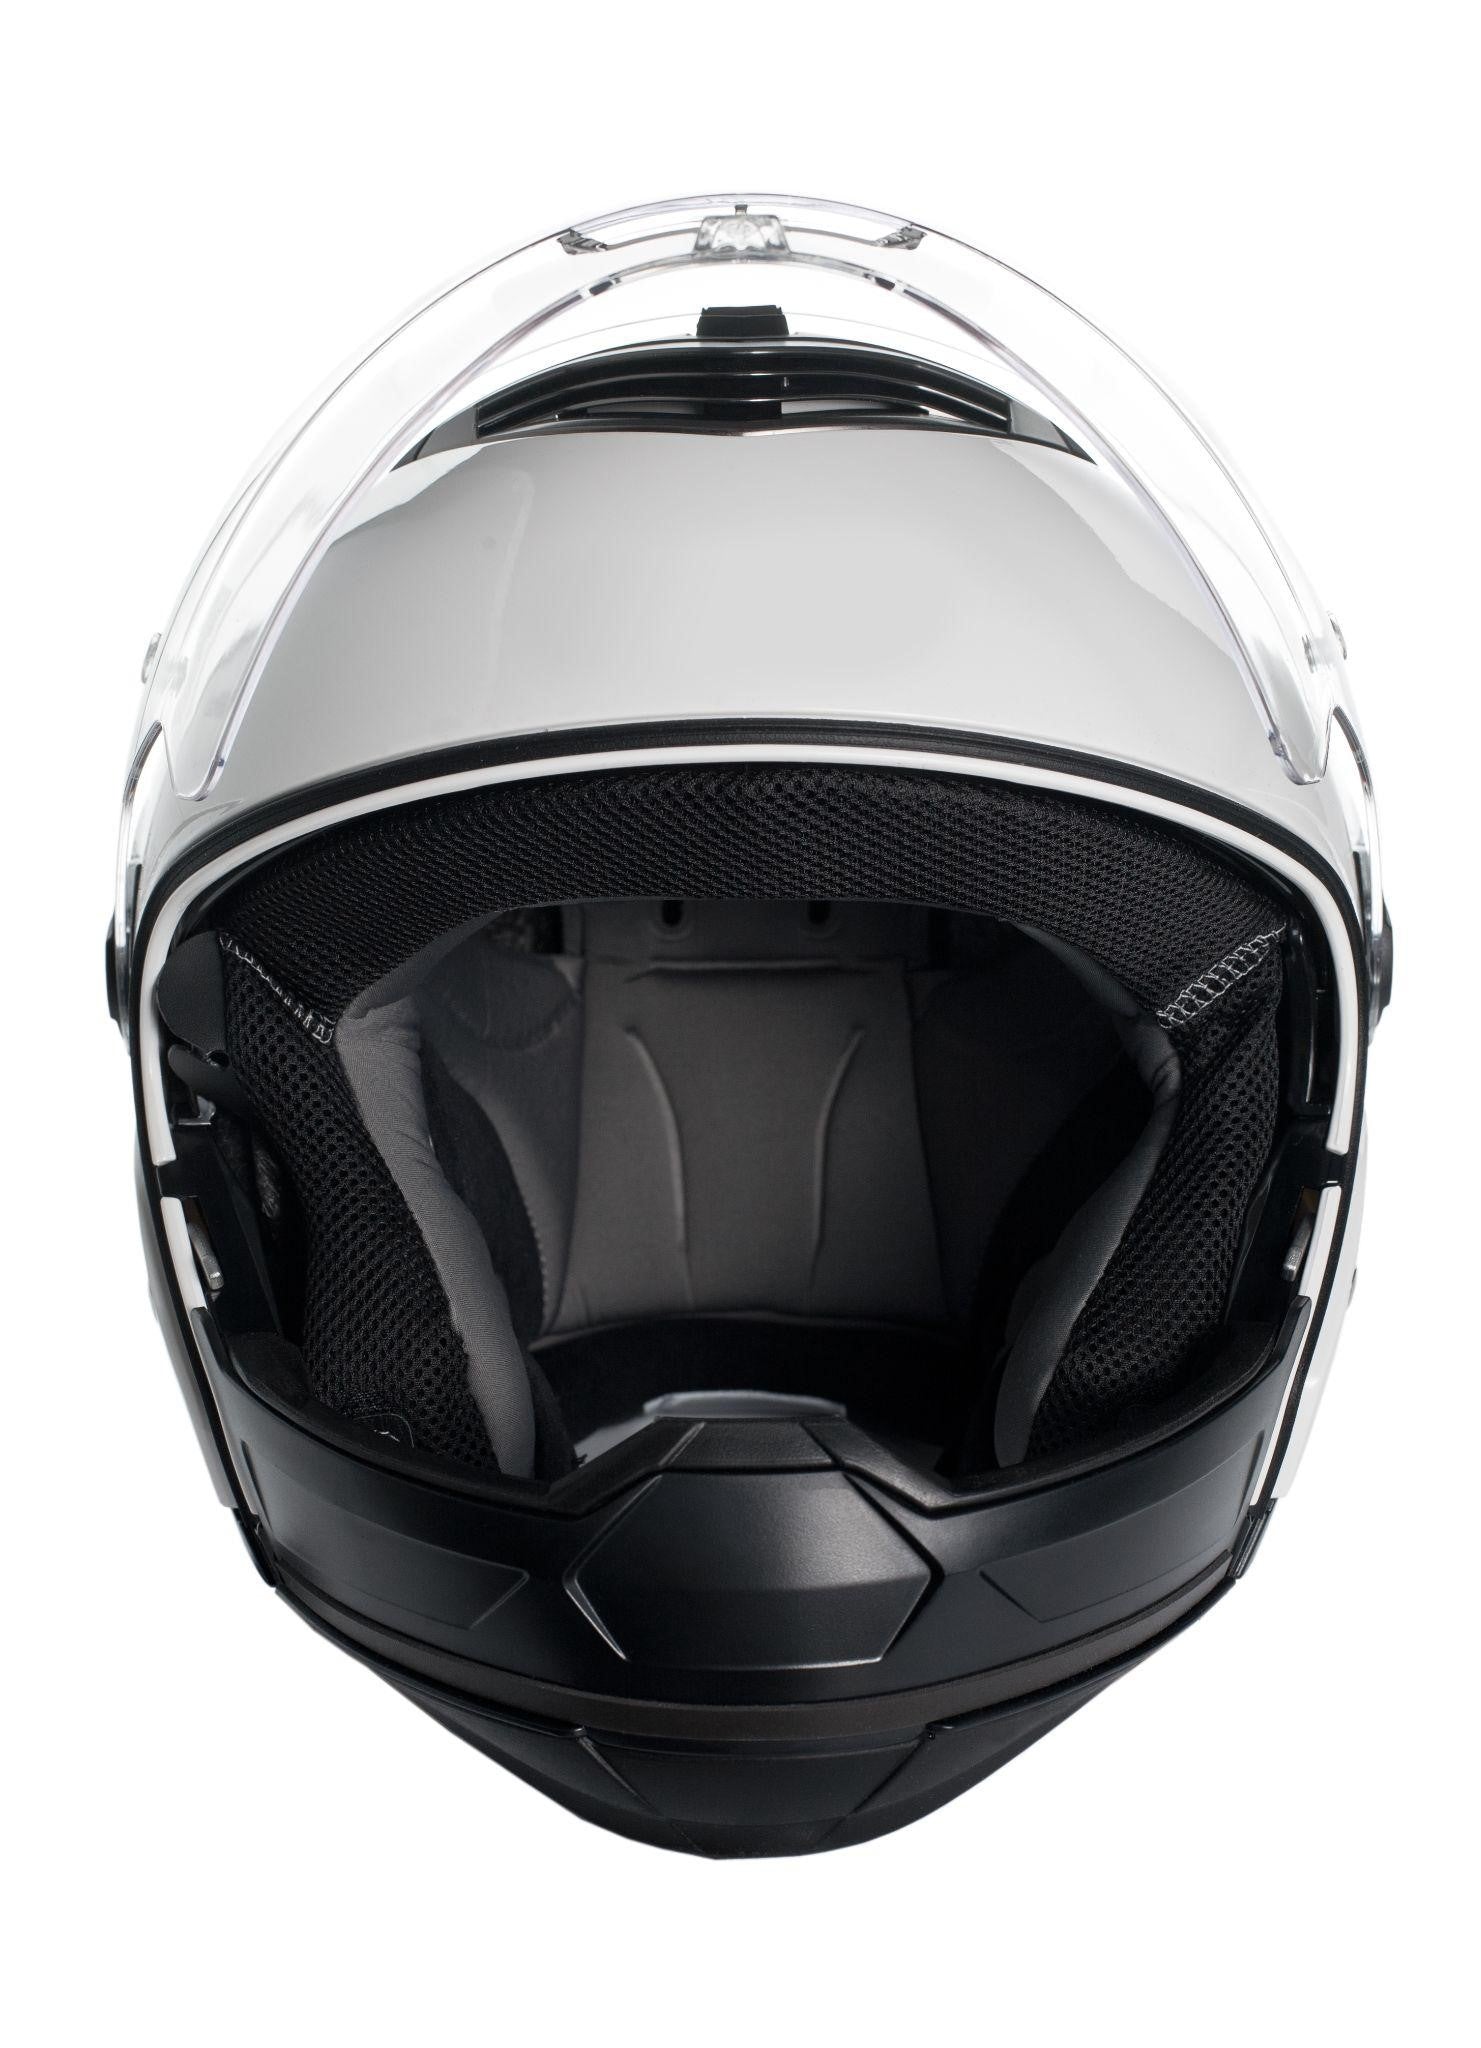 Motorcycle Laws and Licensing - Connecticut Motorcycle Helmet Laws1